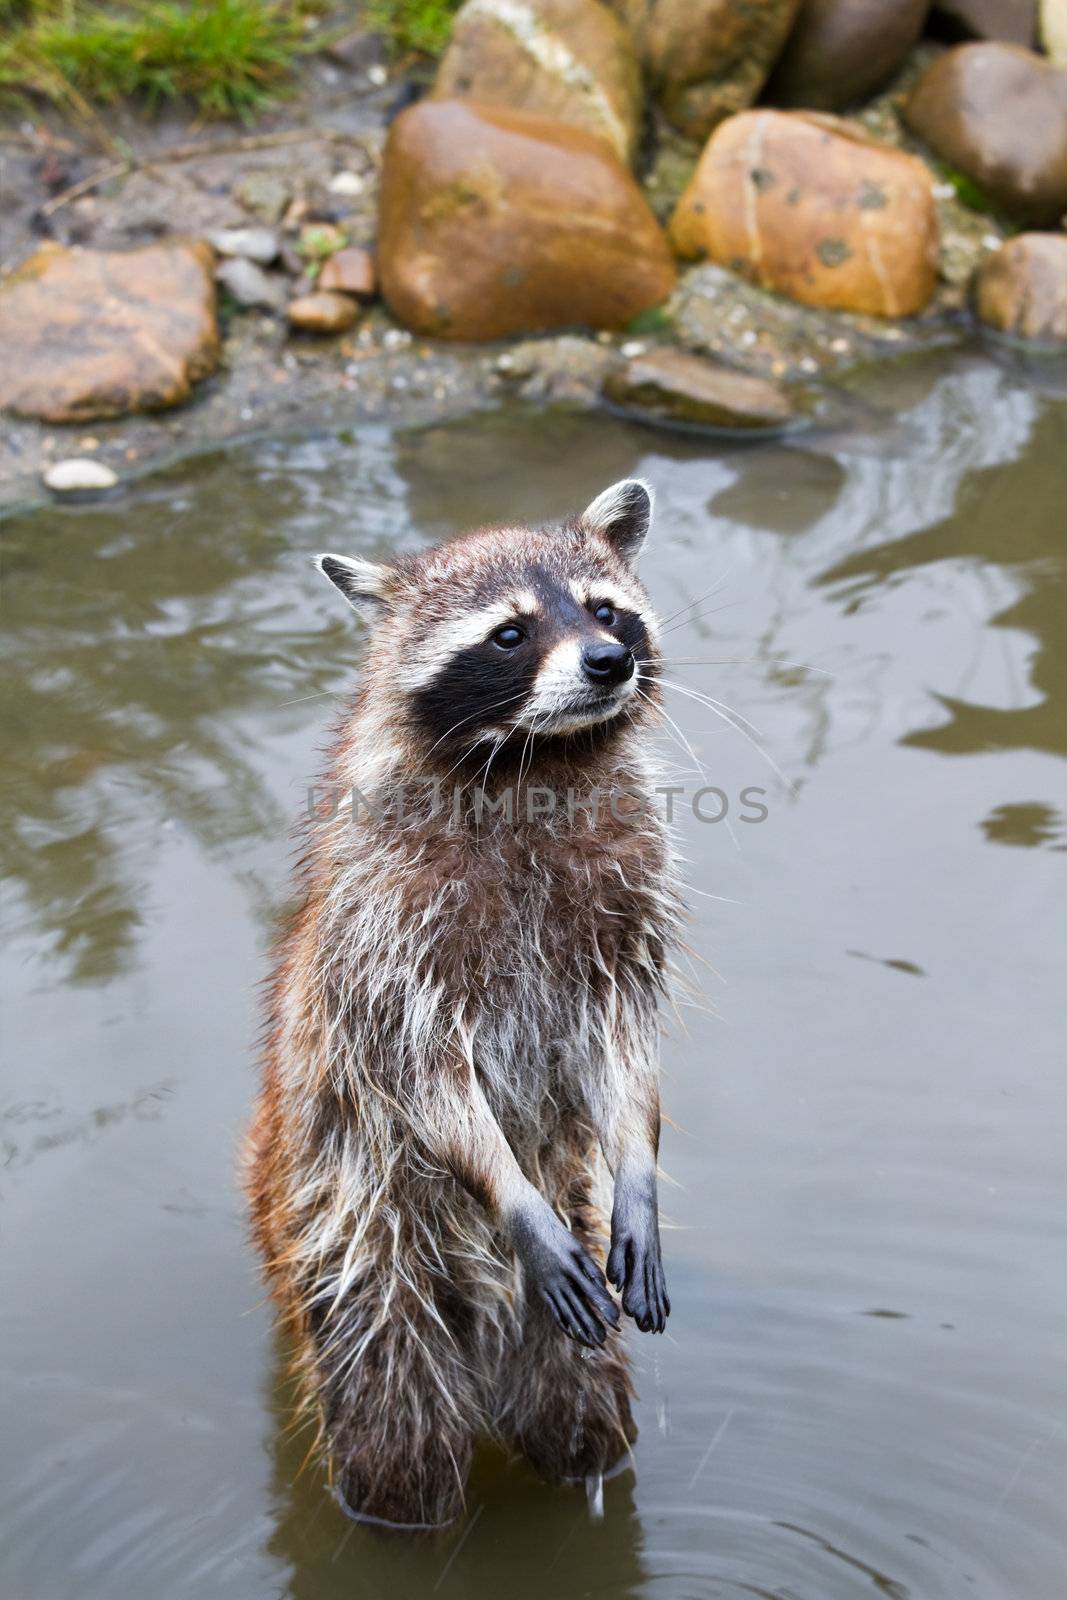 Common raccoon or Procyon lotor by Colette